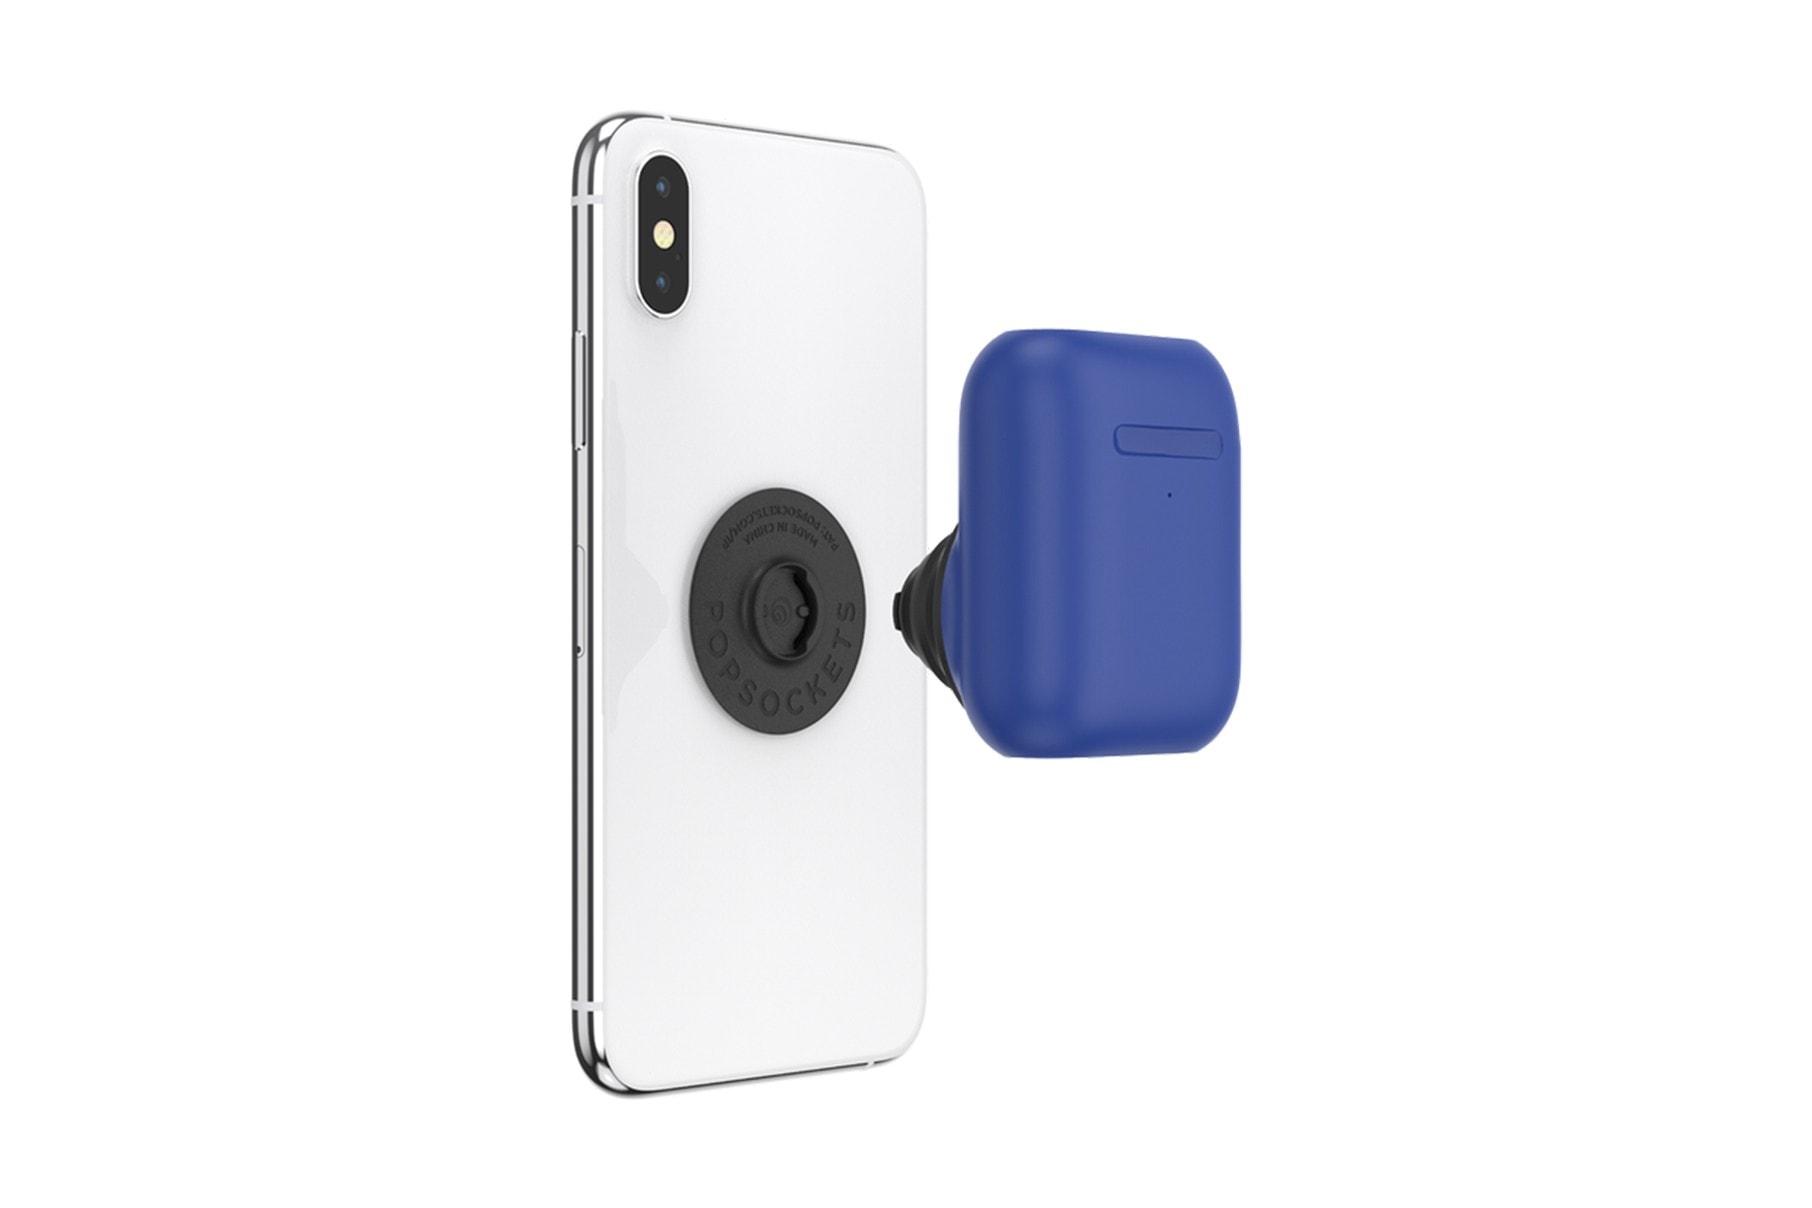 popsockets popgrip apple iphone 11 pro airpods earphones holder wireless charging tech accessory 